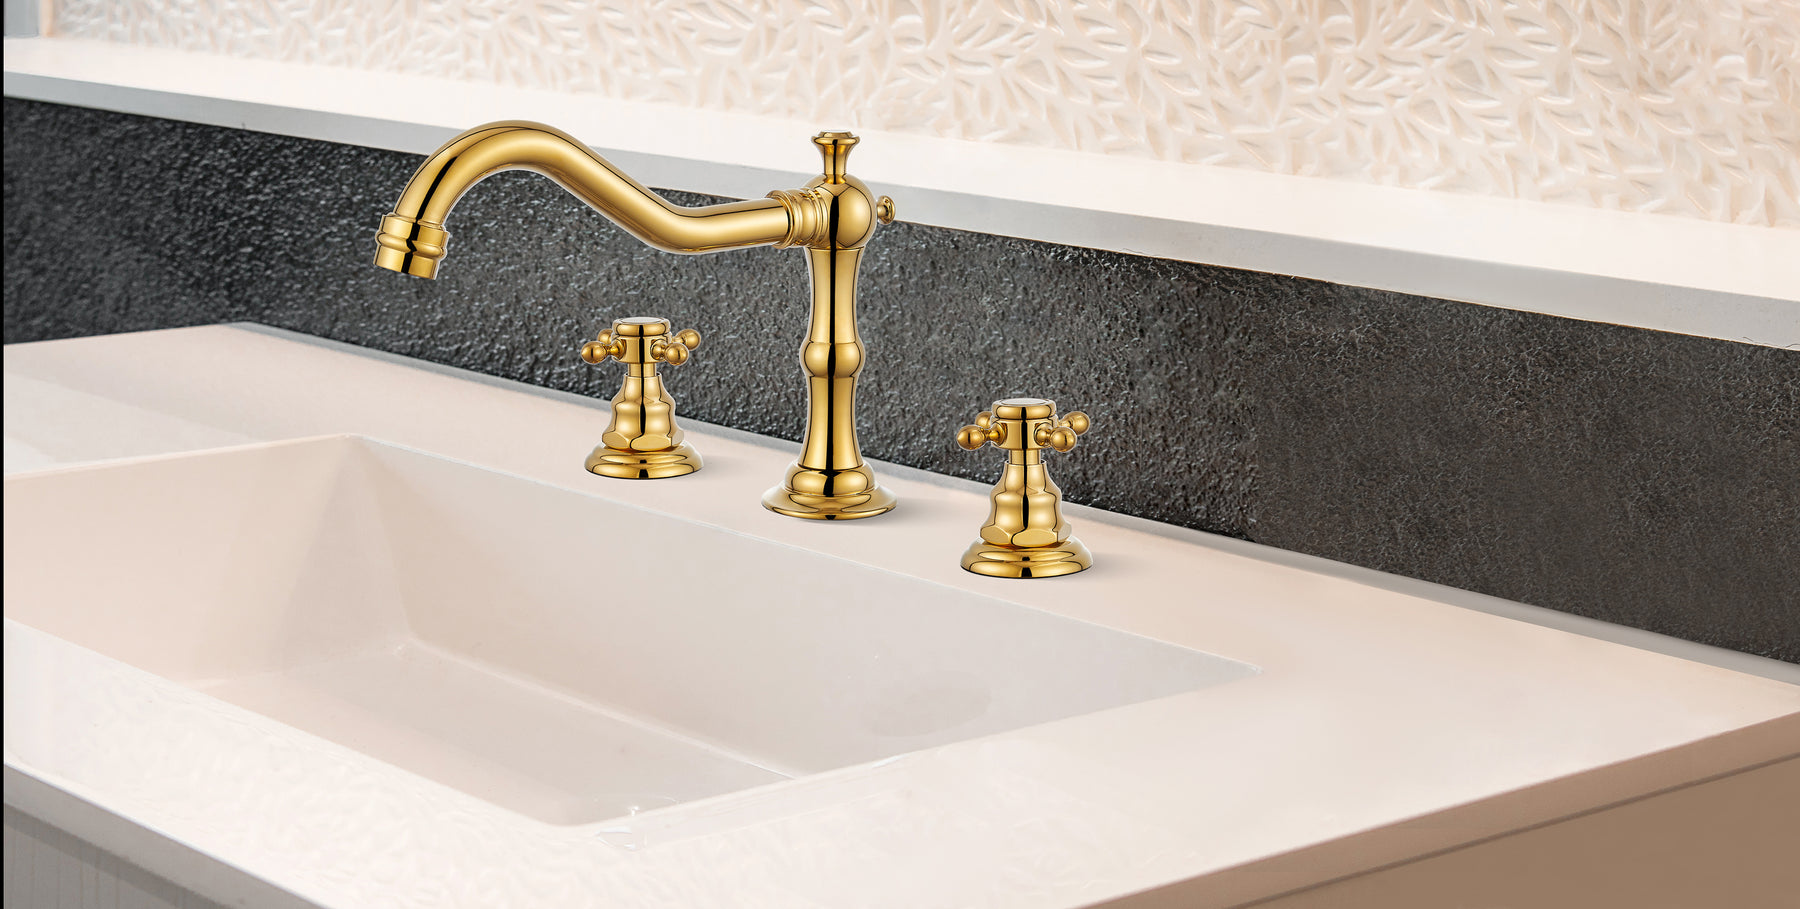 gotonovo Widespread Bathroom Faucet with Pop Up Drain Assembly Included with Overflow Silver Polished Gold 3 Holes Deck Mounted Victorian Style Dual Cross Knobs Hot and Cold Water